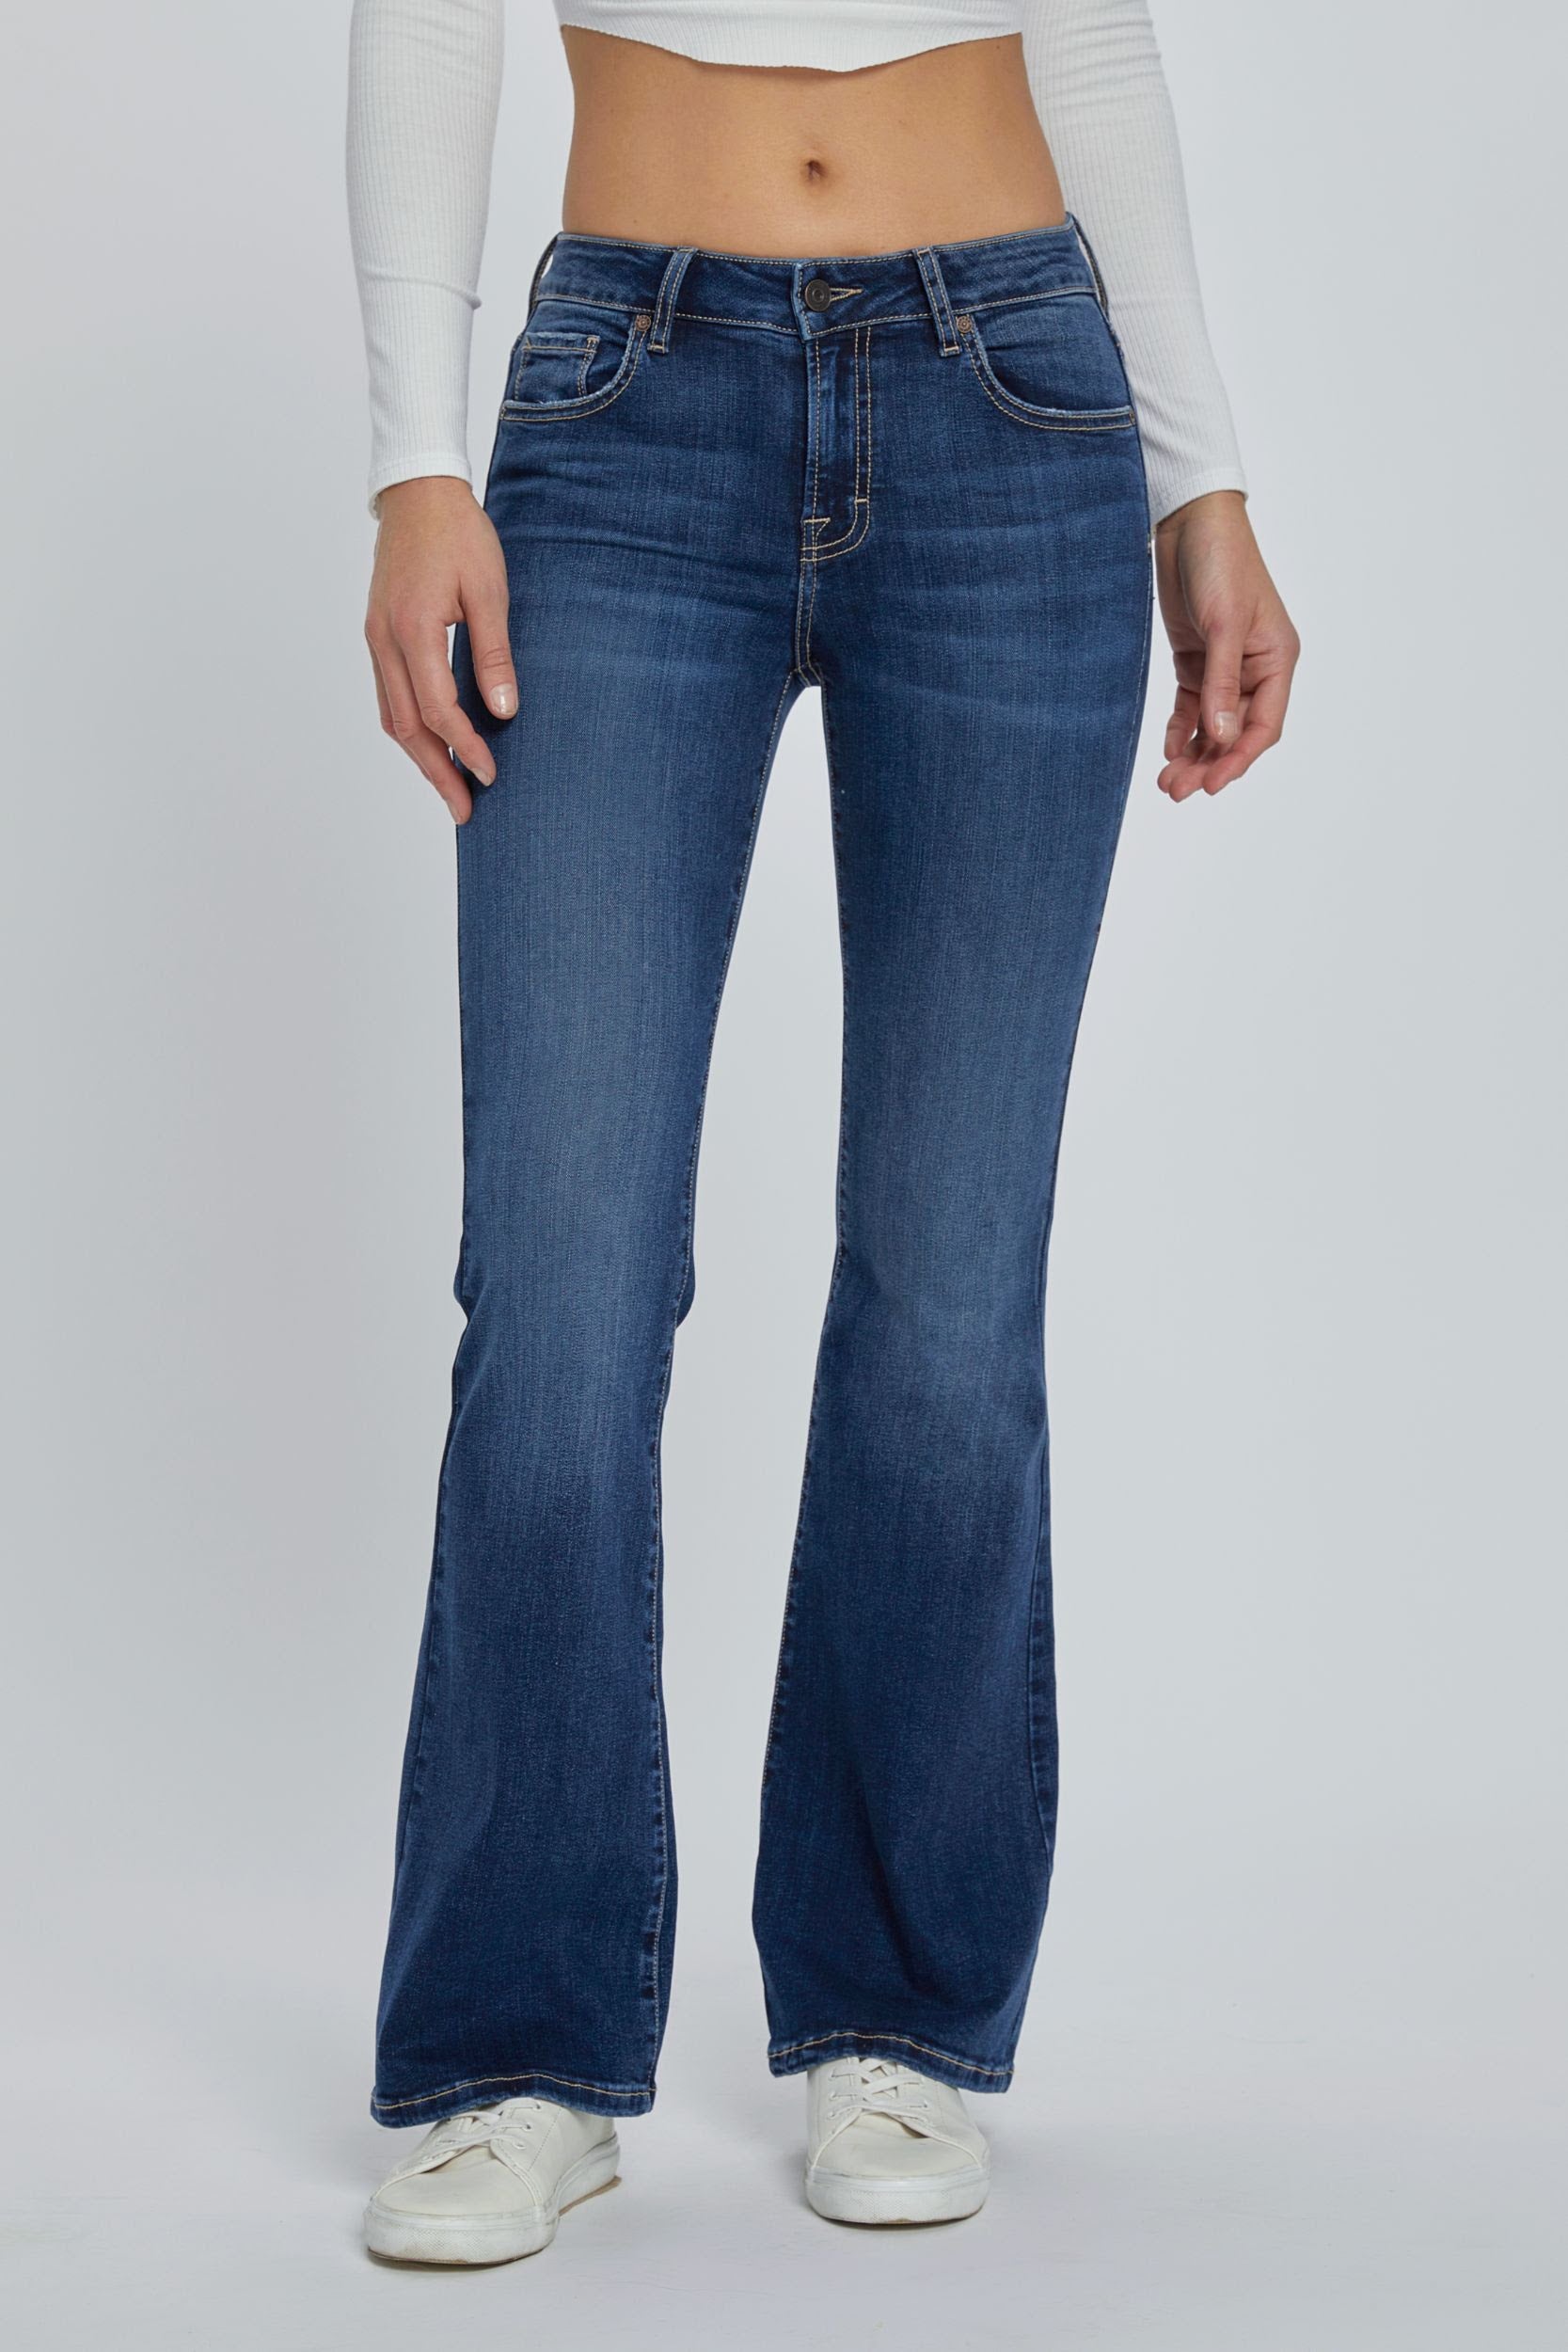 Women's Denim: Perfect Fit for Every Shape